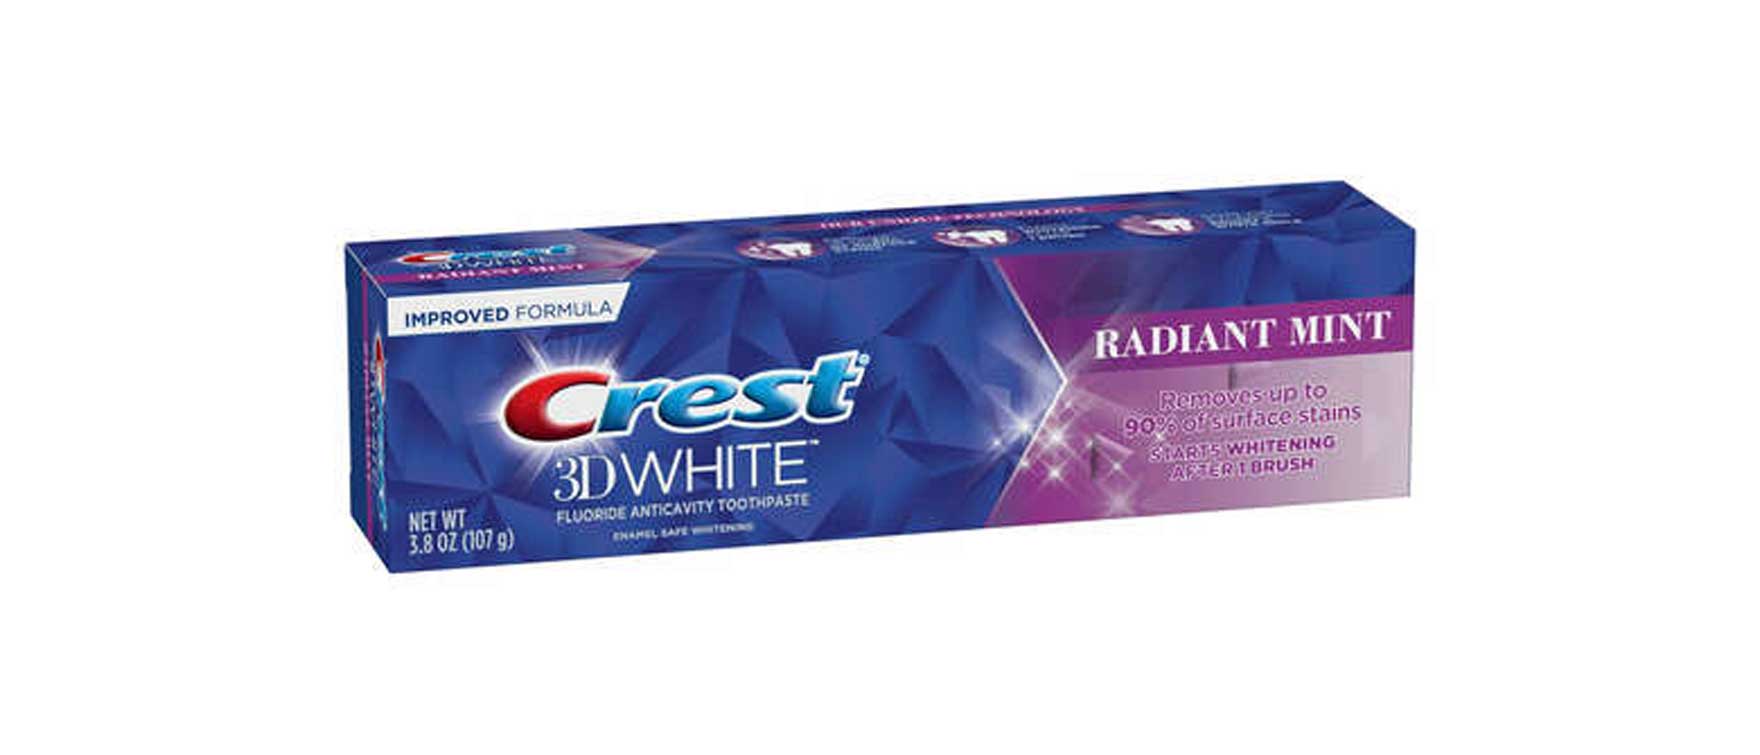 2. 3D White by Crest